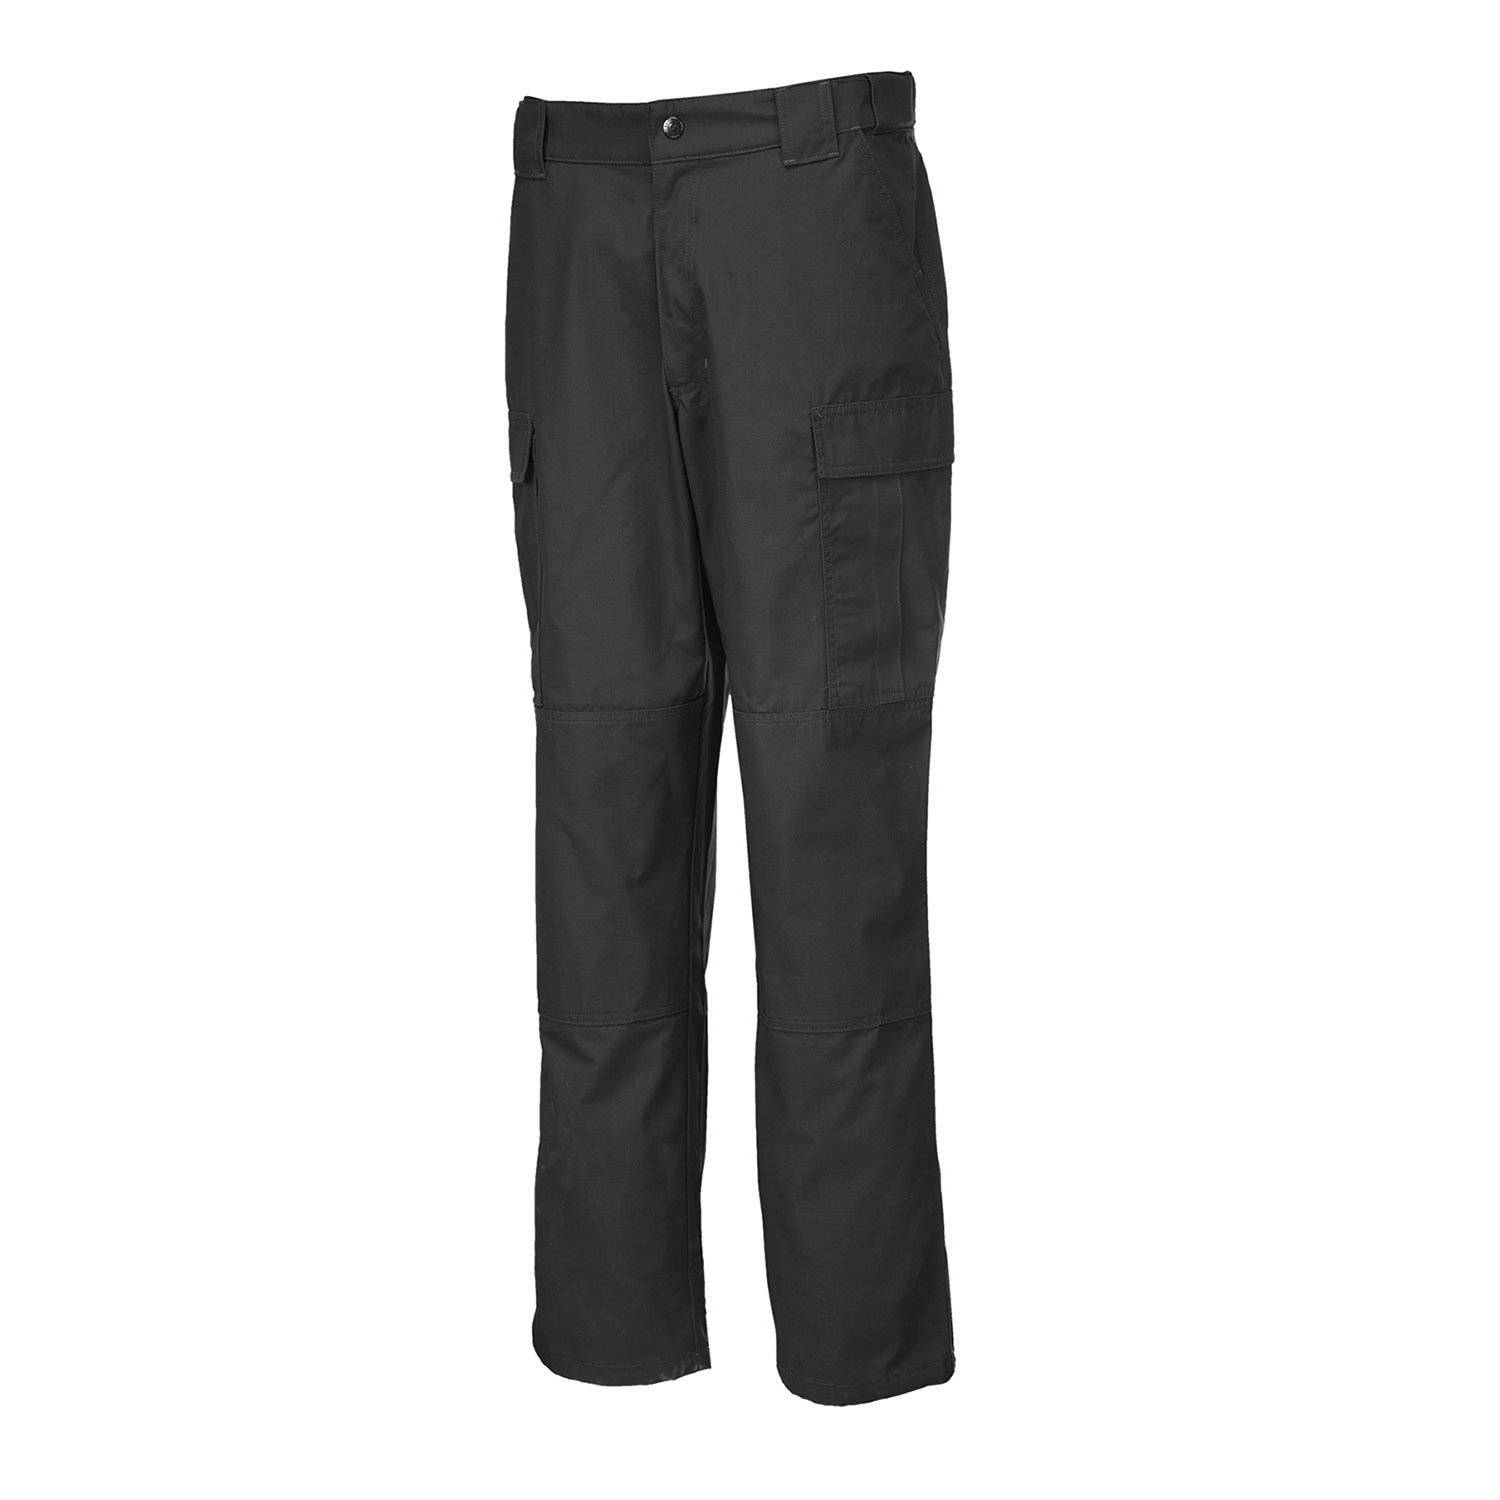 5.11 Tactical Men's Taclite TDU Professional Work Pants Polyester-Cotton Fabric Style 74280 